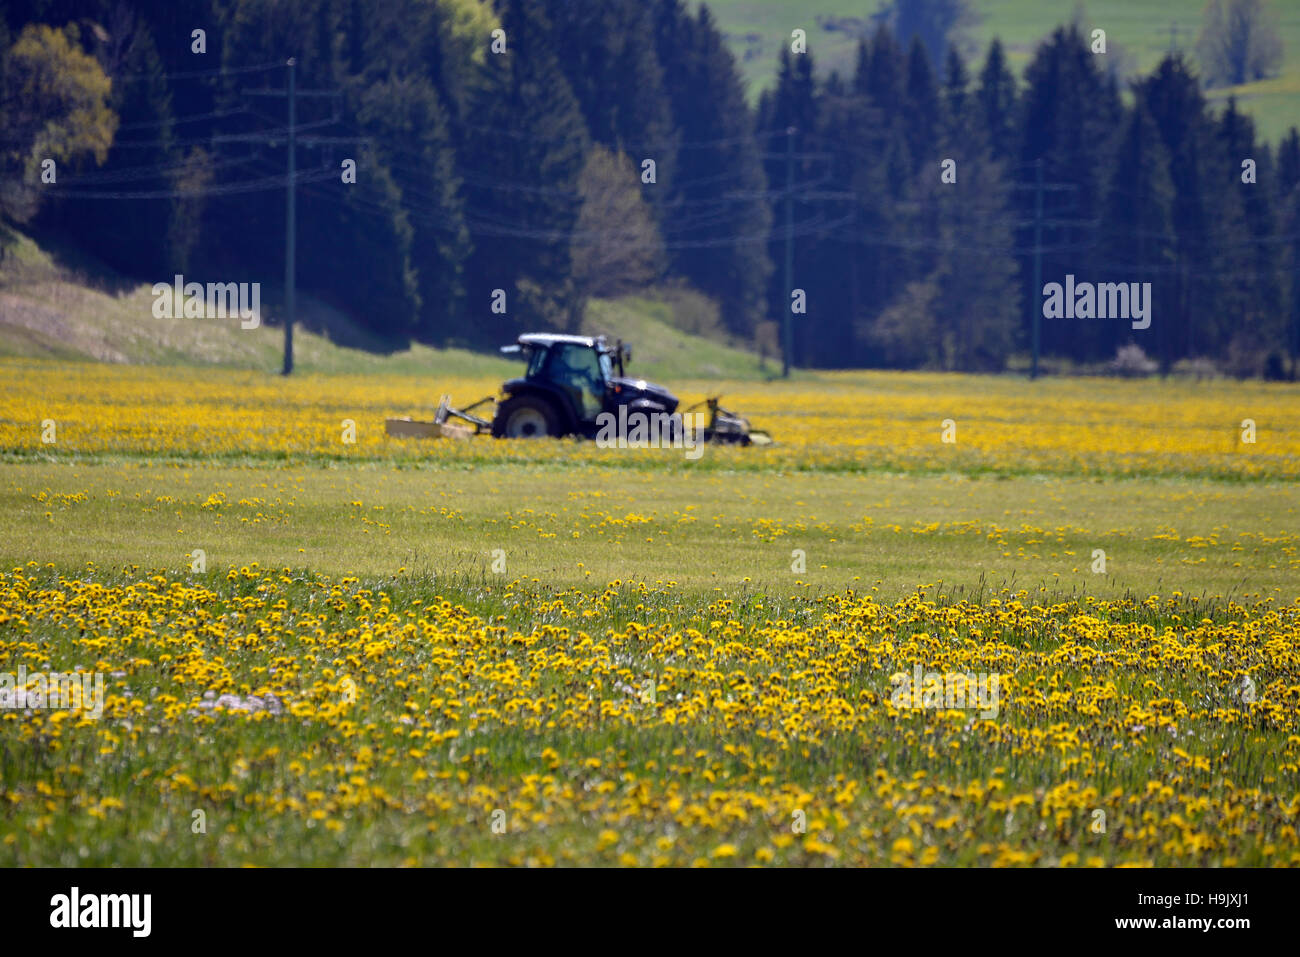 Tractor on a field behind a dandelion meadow Stock Photo